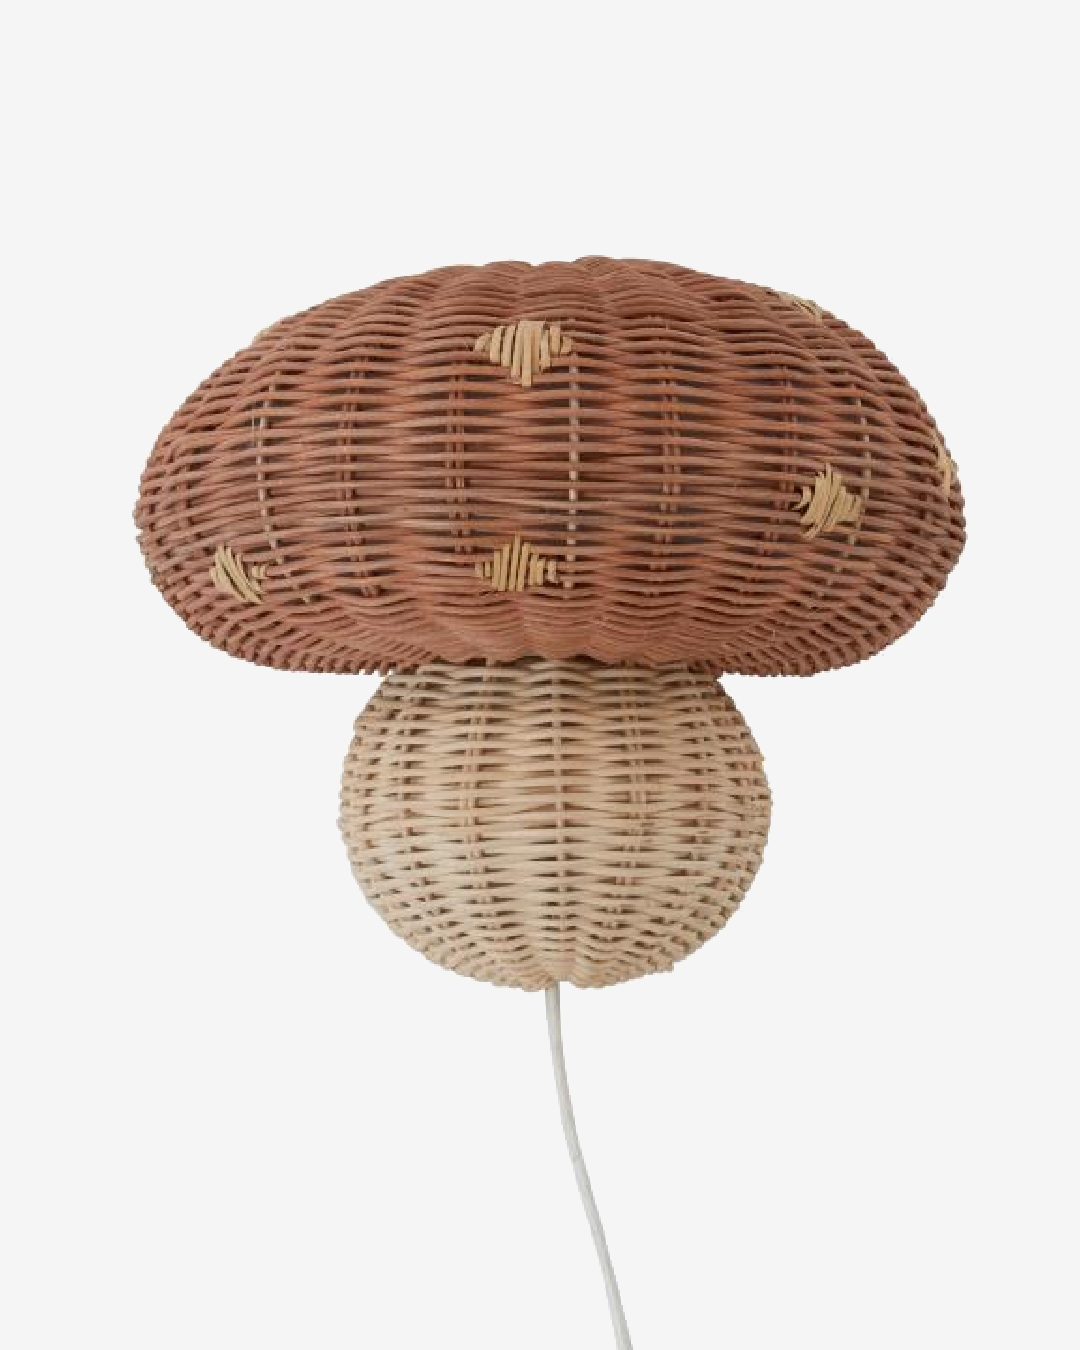 Rattan cane mushroom shaped red and brown lamp